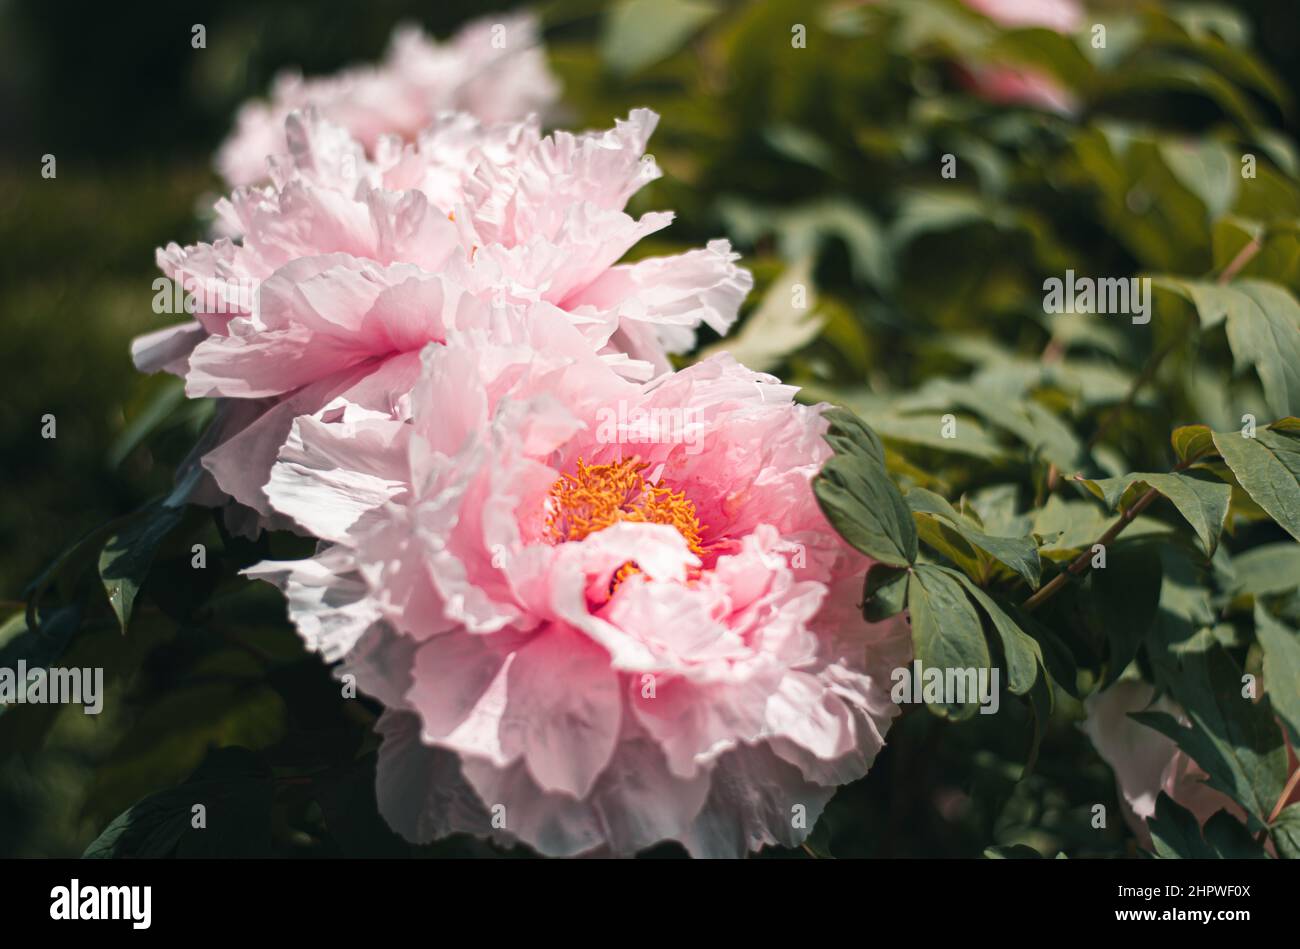 A close up photo of two pink flowers in a bush Stock Photo